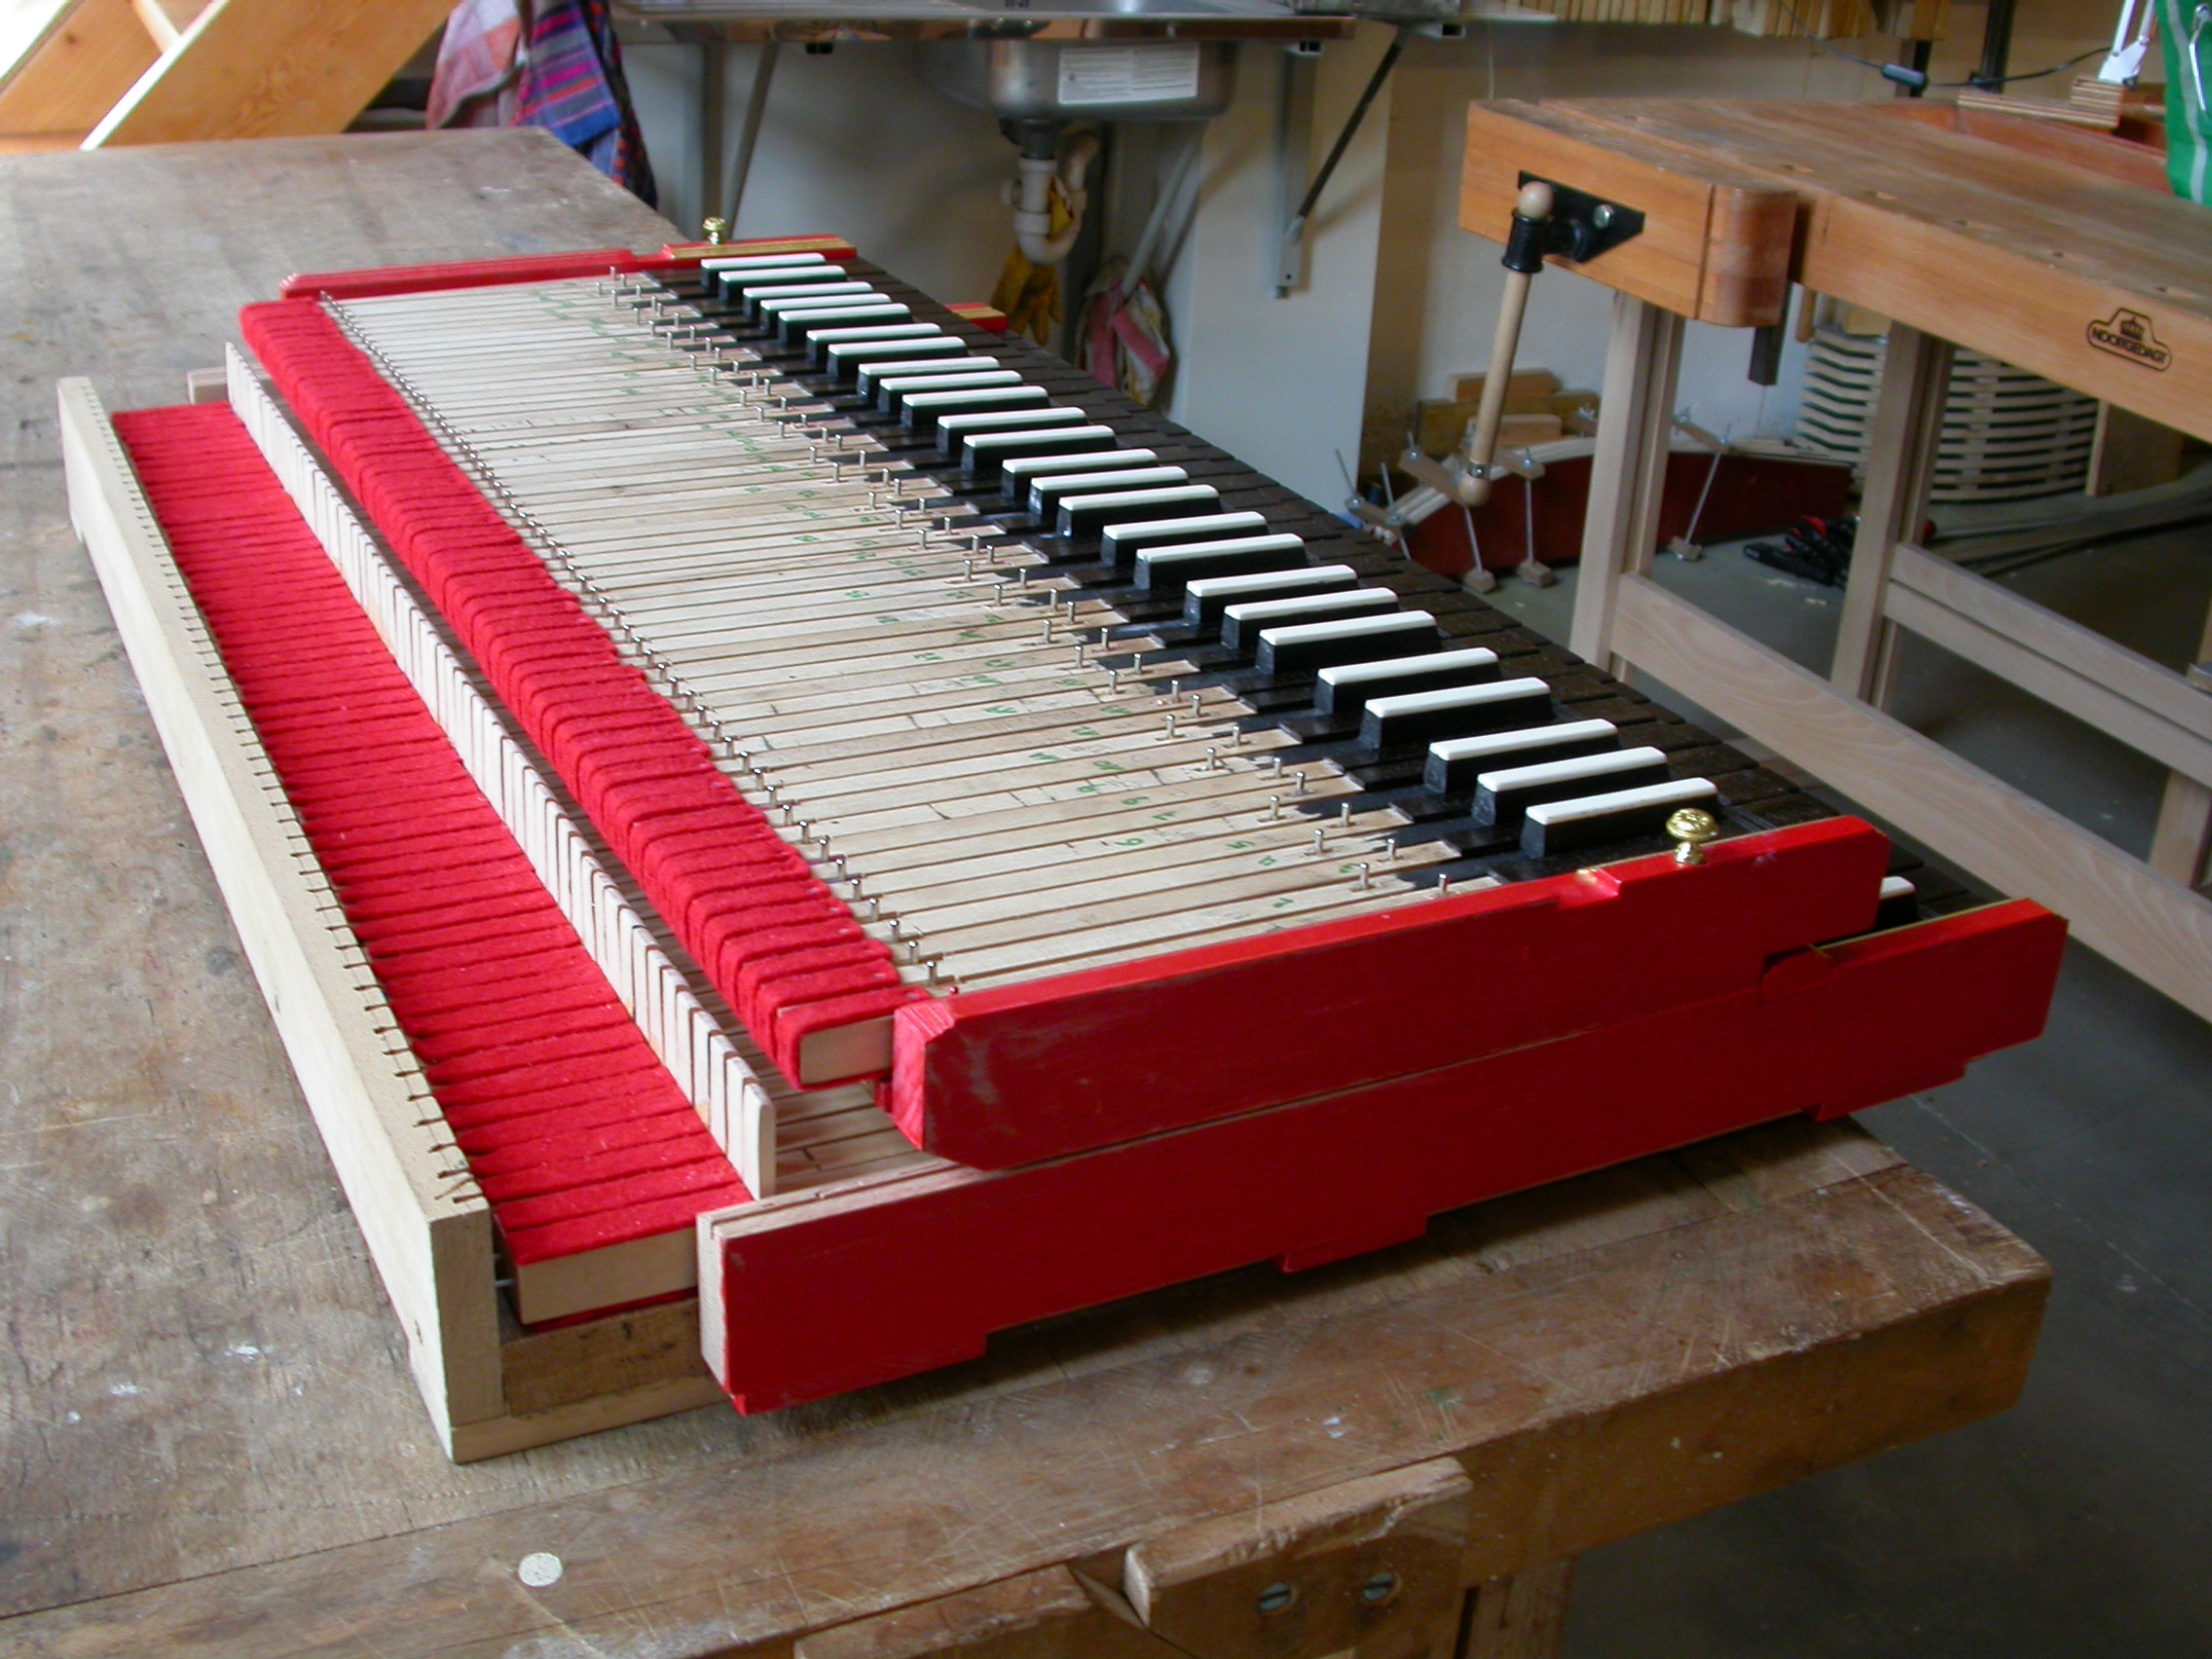 paul piano in the making instrument making creating school under construction keys music